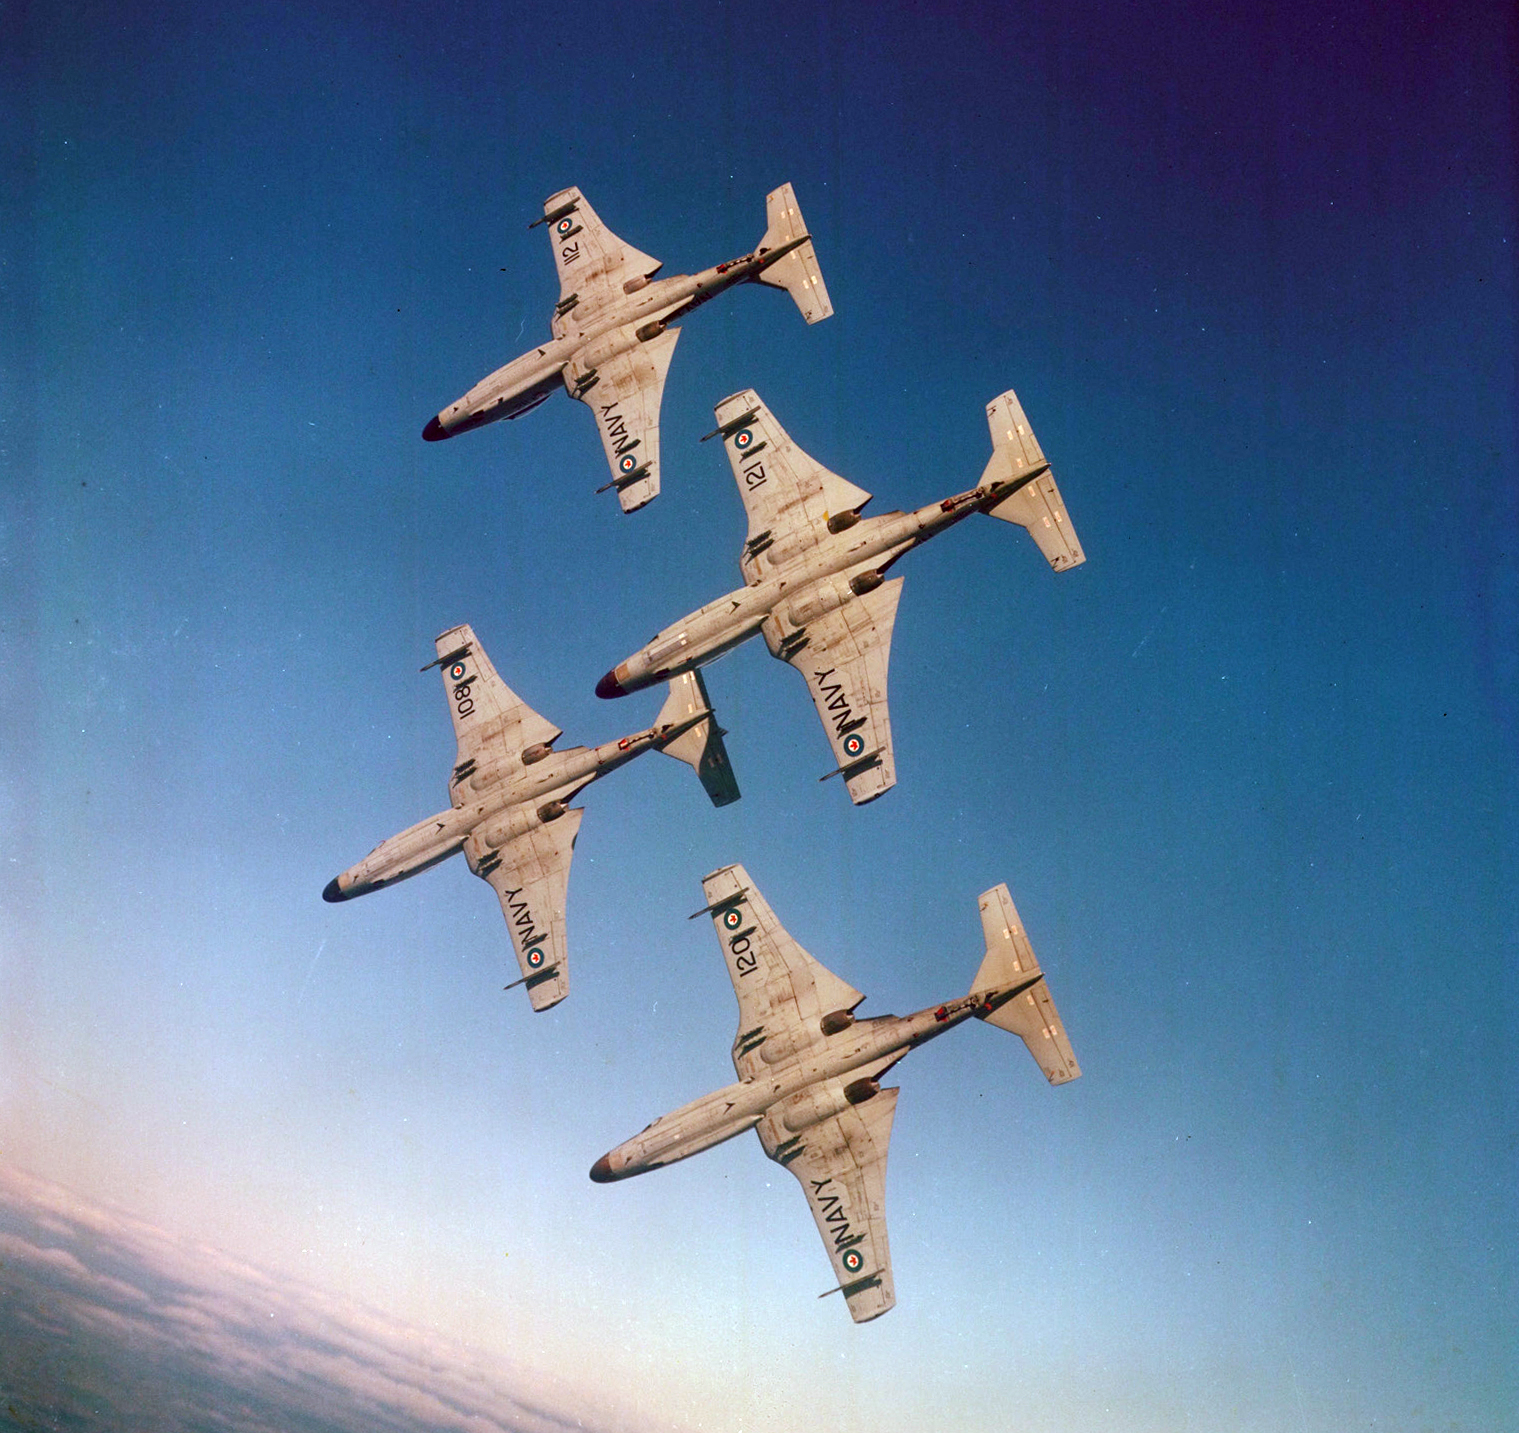 The Royal Canadian Navy’s aerobatic team of four Banshees, called the “Grey Ghosts”. PHOTO: DND Archives, EKS-701